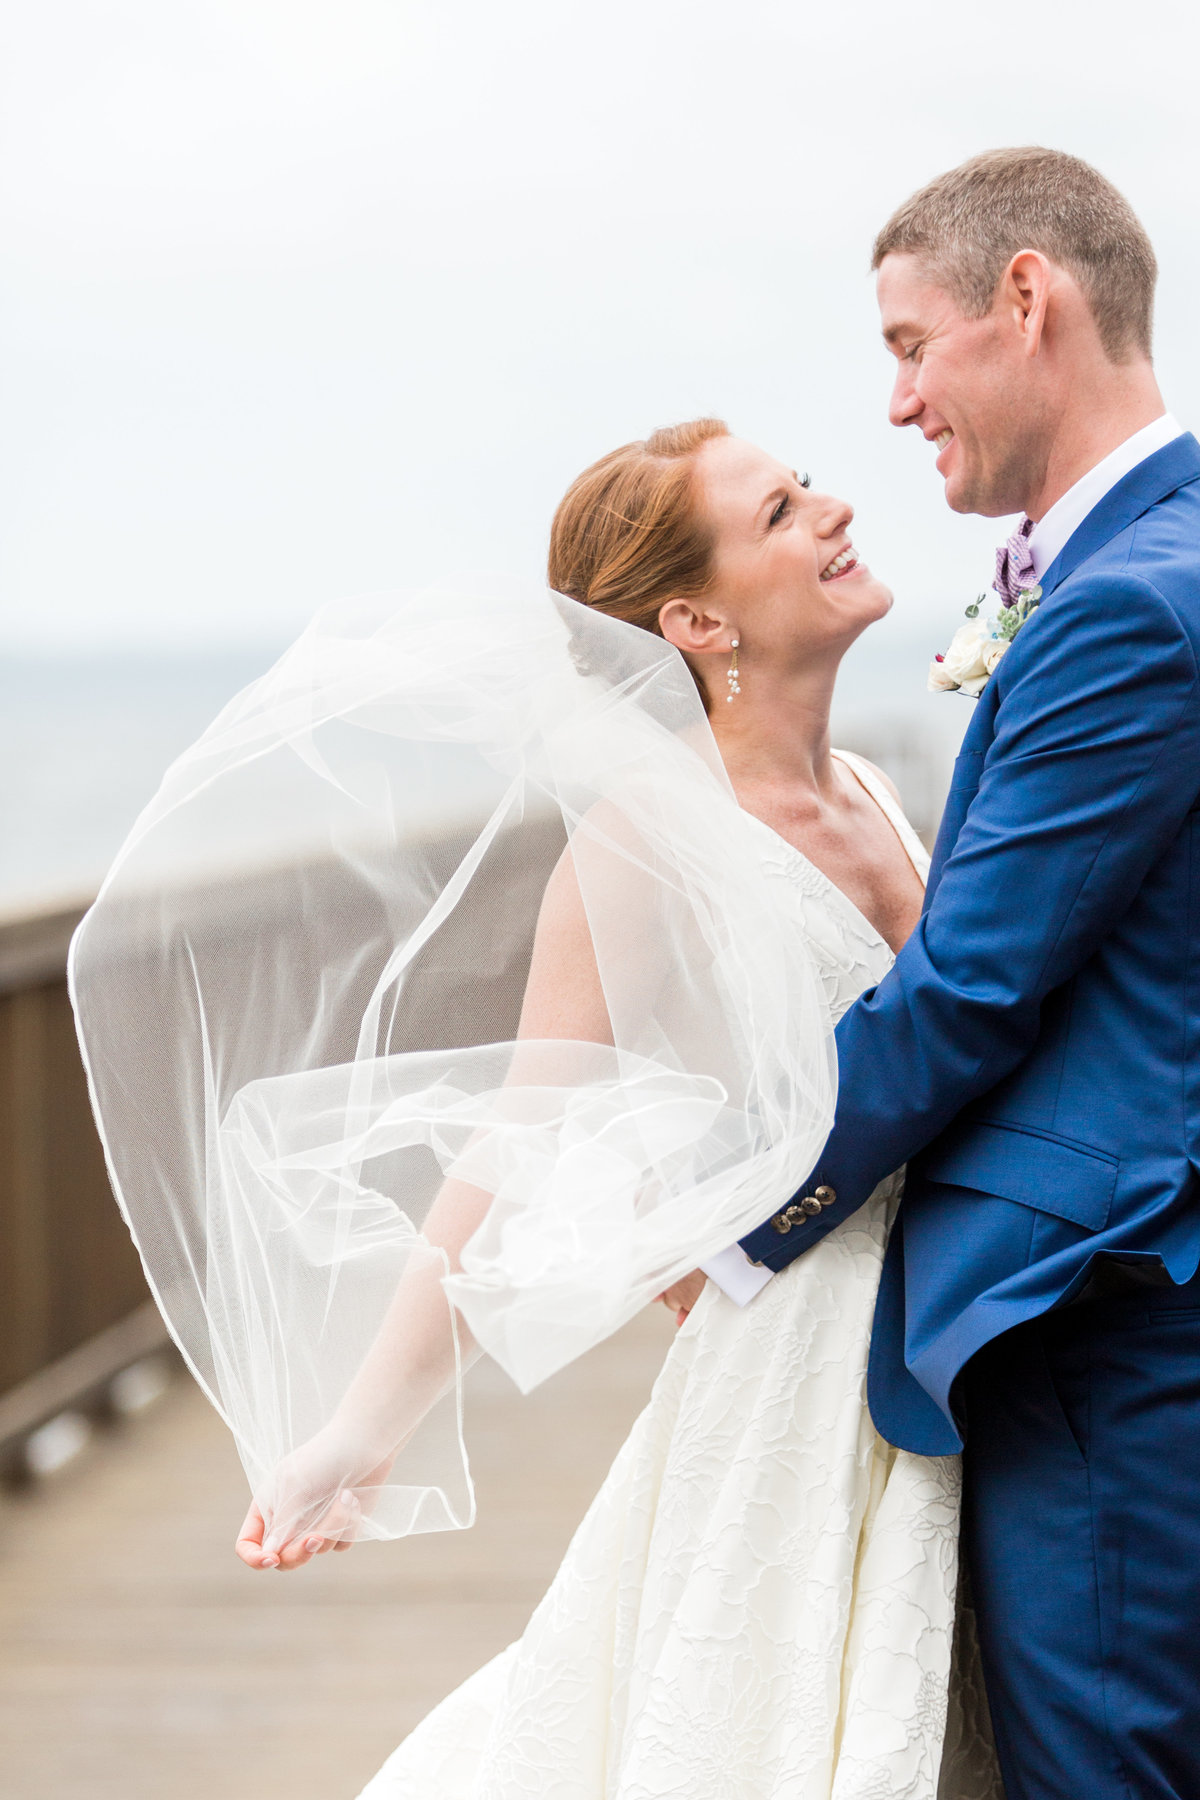 Kristina Staal Photography - Brittany & Ed Wedding - Coveleigh Club Rye NY Sep 14 2019-201